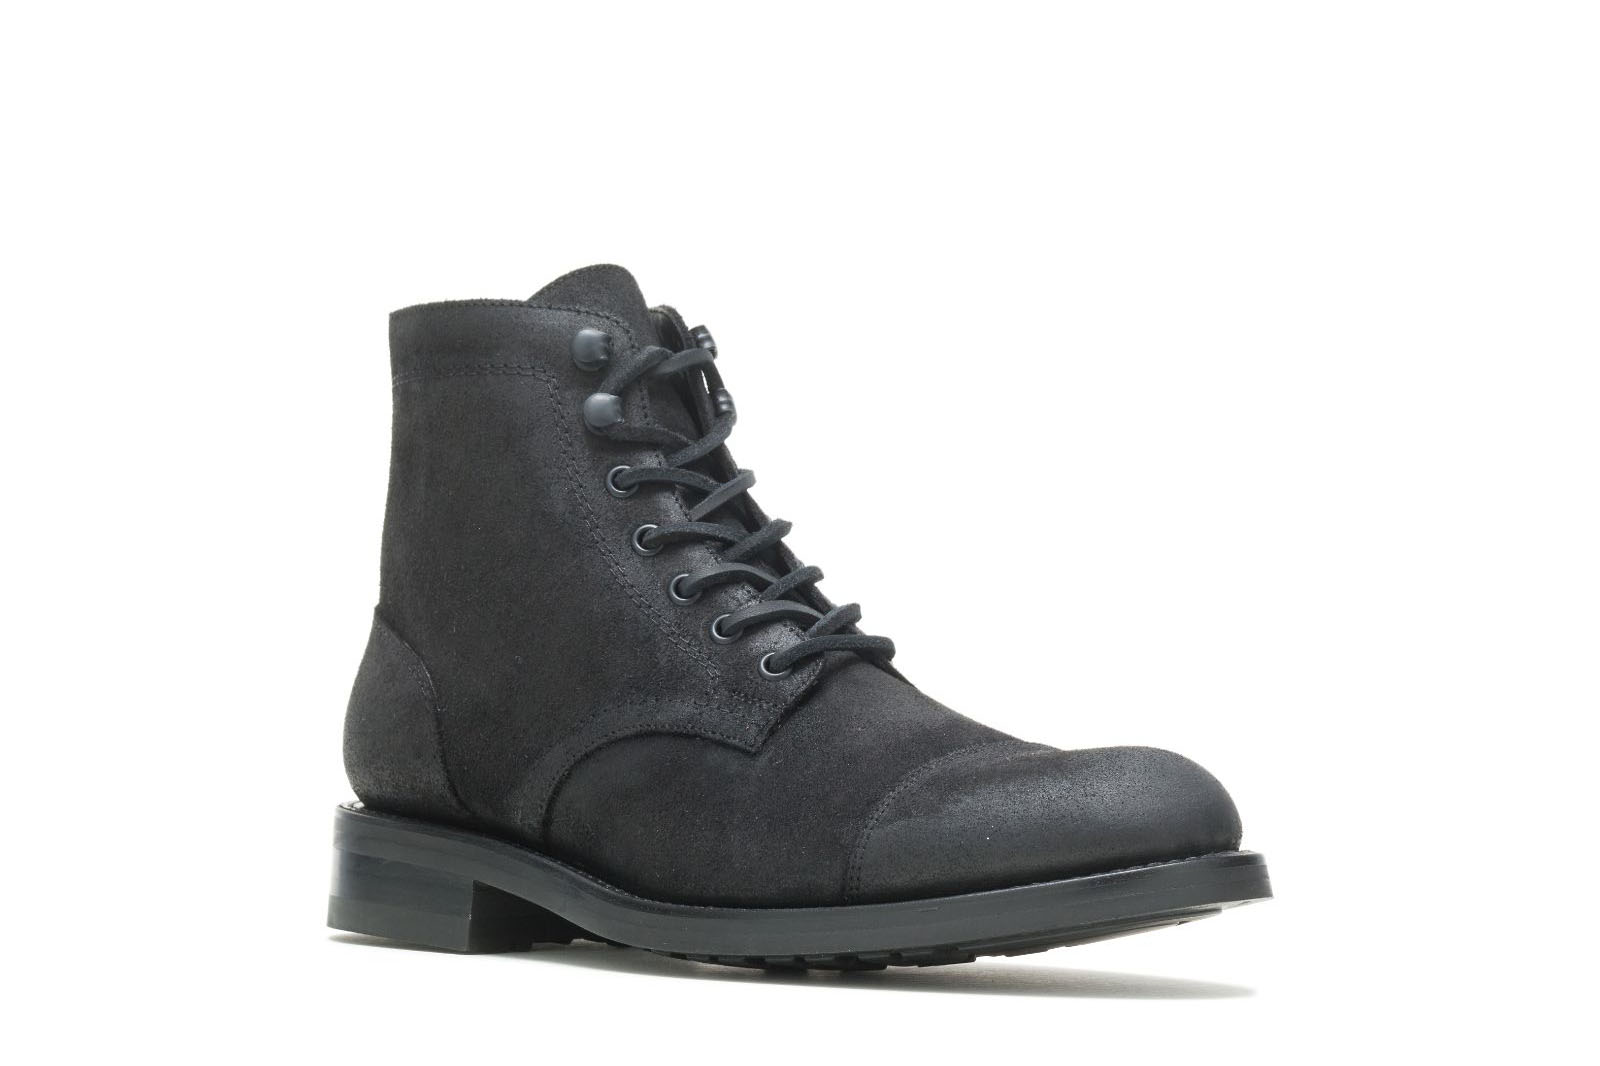 Buy classic, well-made boots like this cap-toe style from Wolverine.